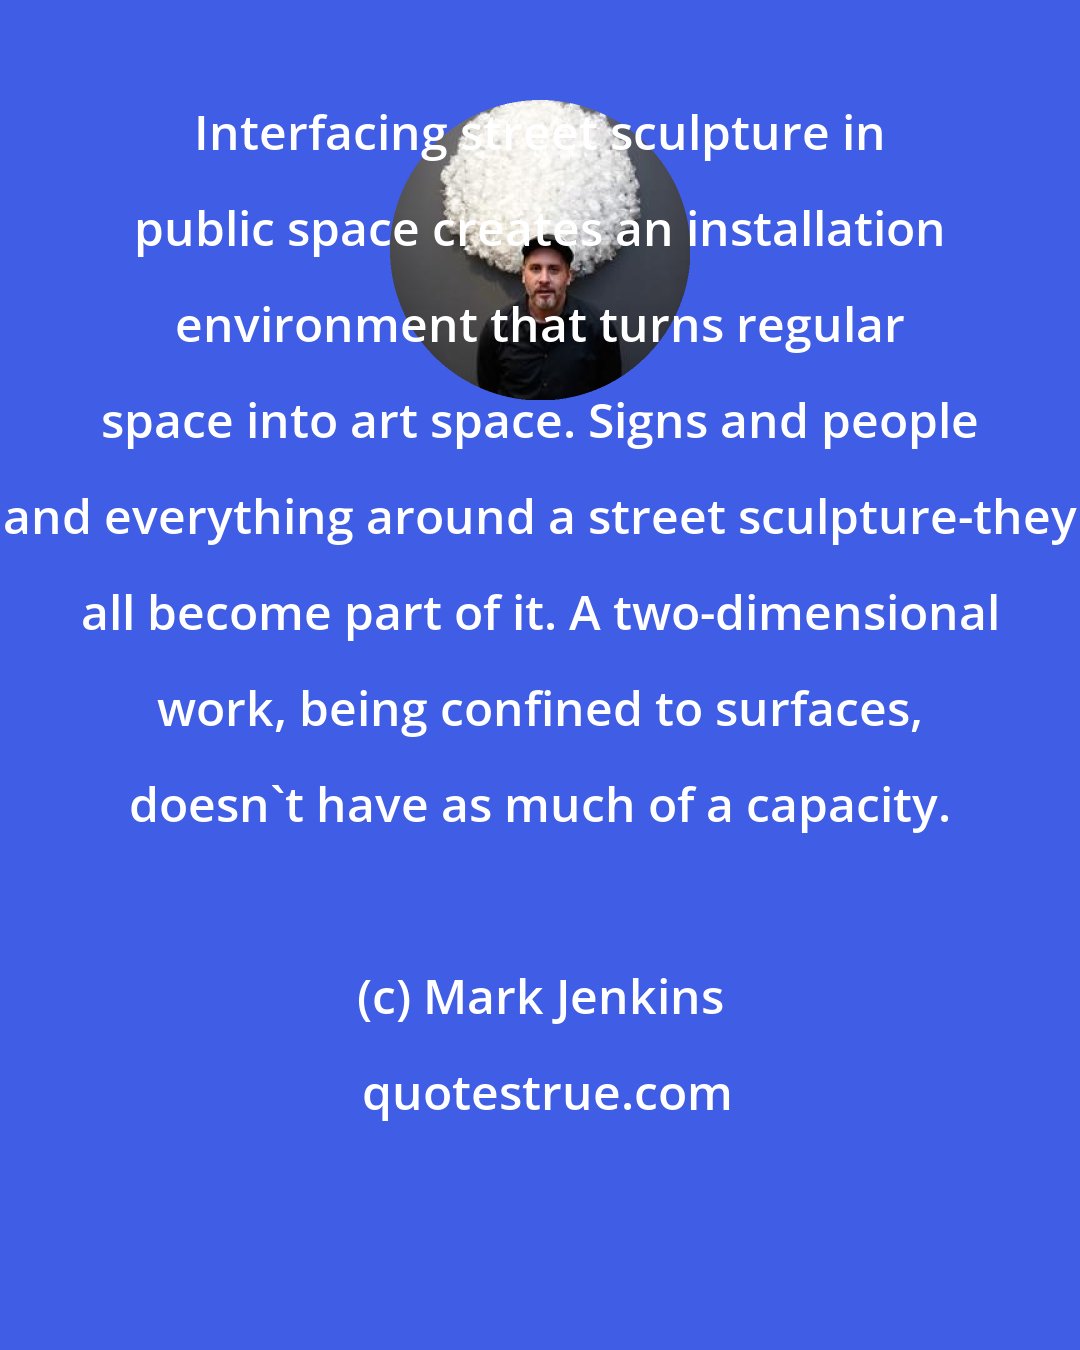 Mark Jenkins: Interfacing street sculpture in public space creates an installation environment that turns regular space into art space. Signs and people and everything around a street sculpture-they all become part of it. A two-dimensional work, being confined to surfaces, doesn't have as much of a capacity.